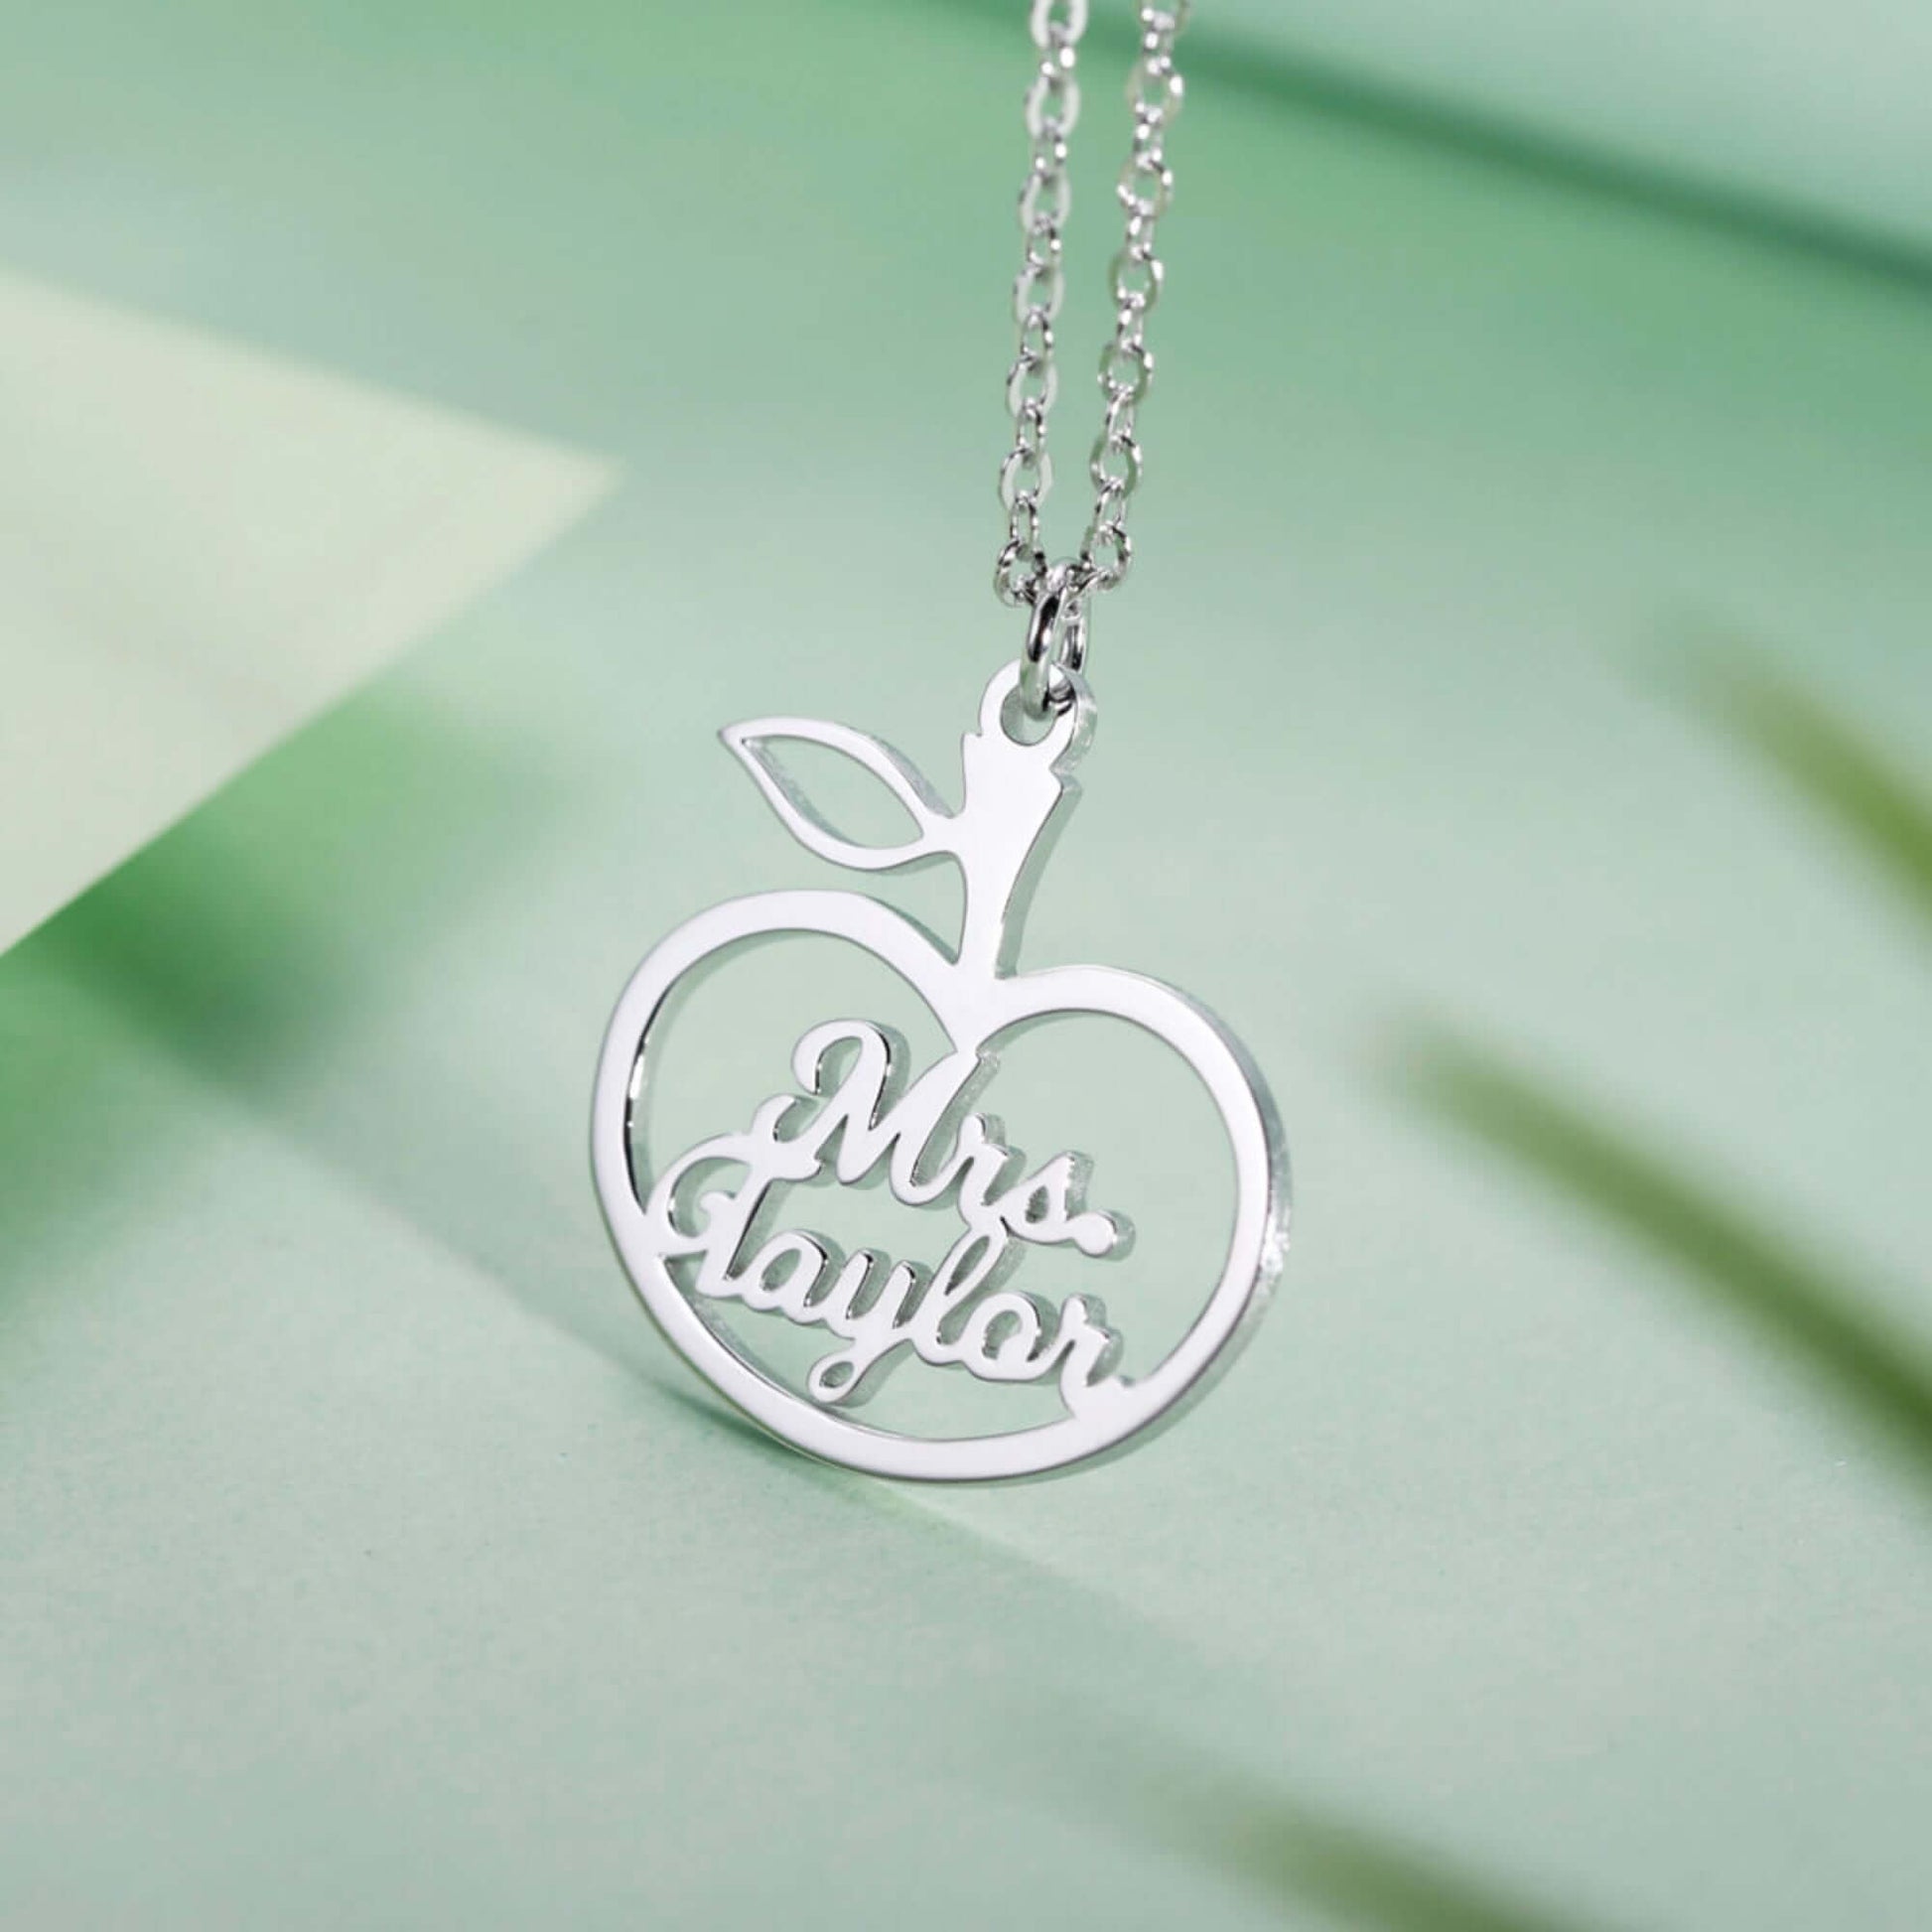 Personalized Apple Style Teacher Name Necklace